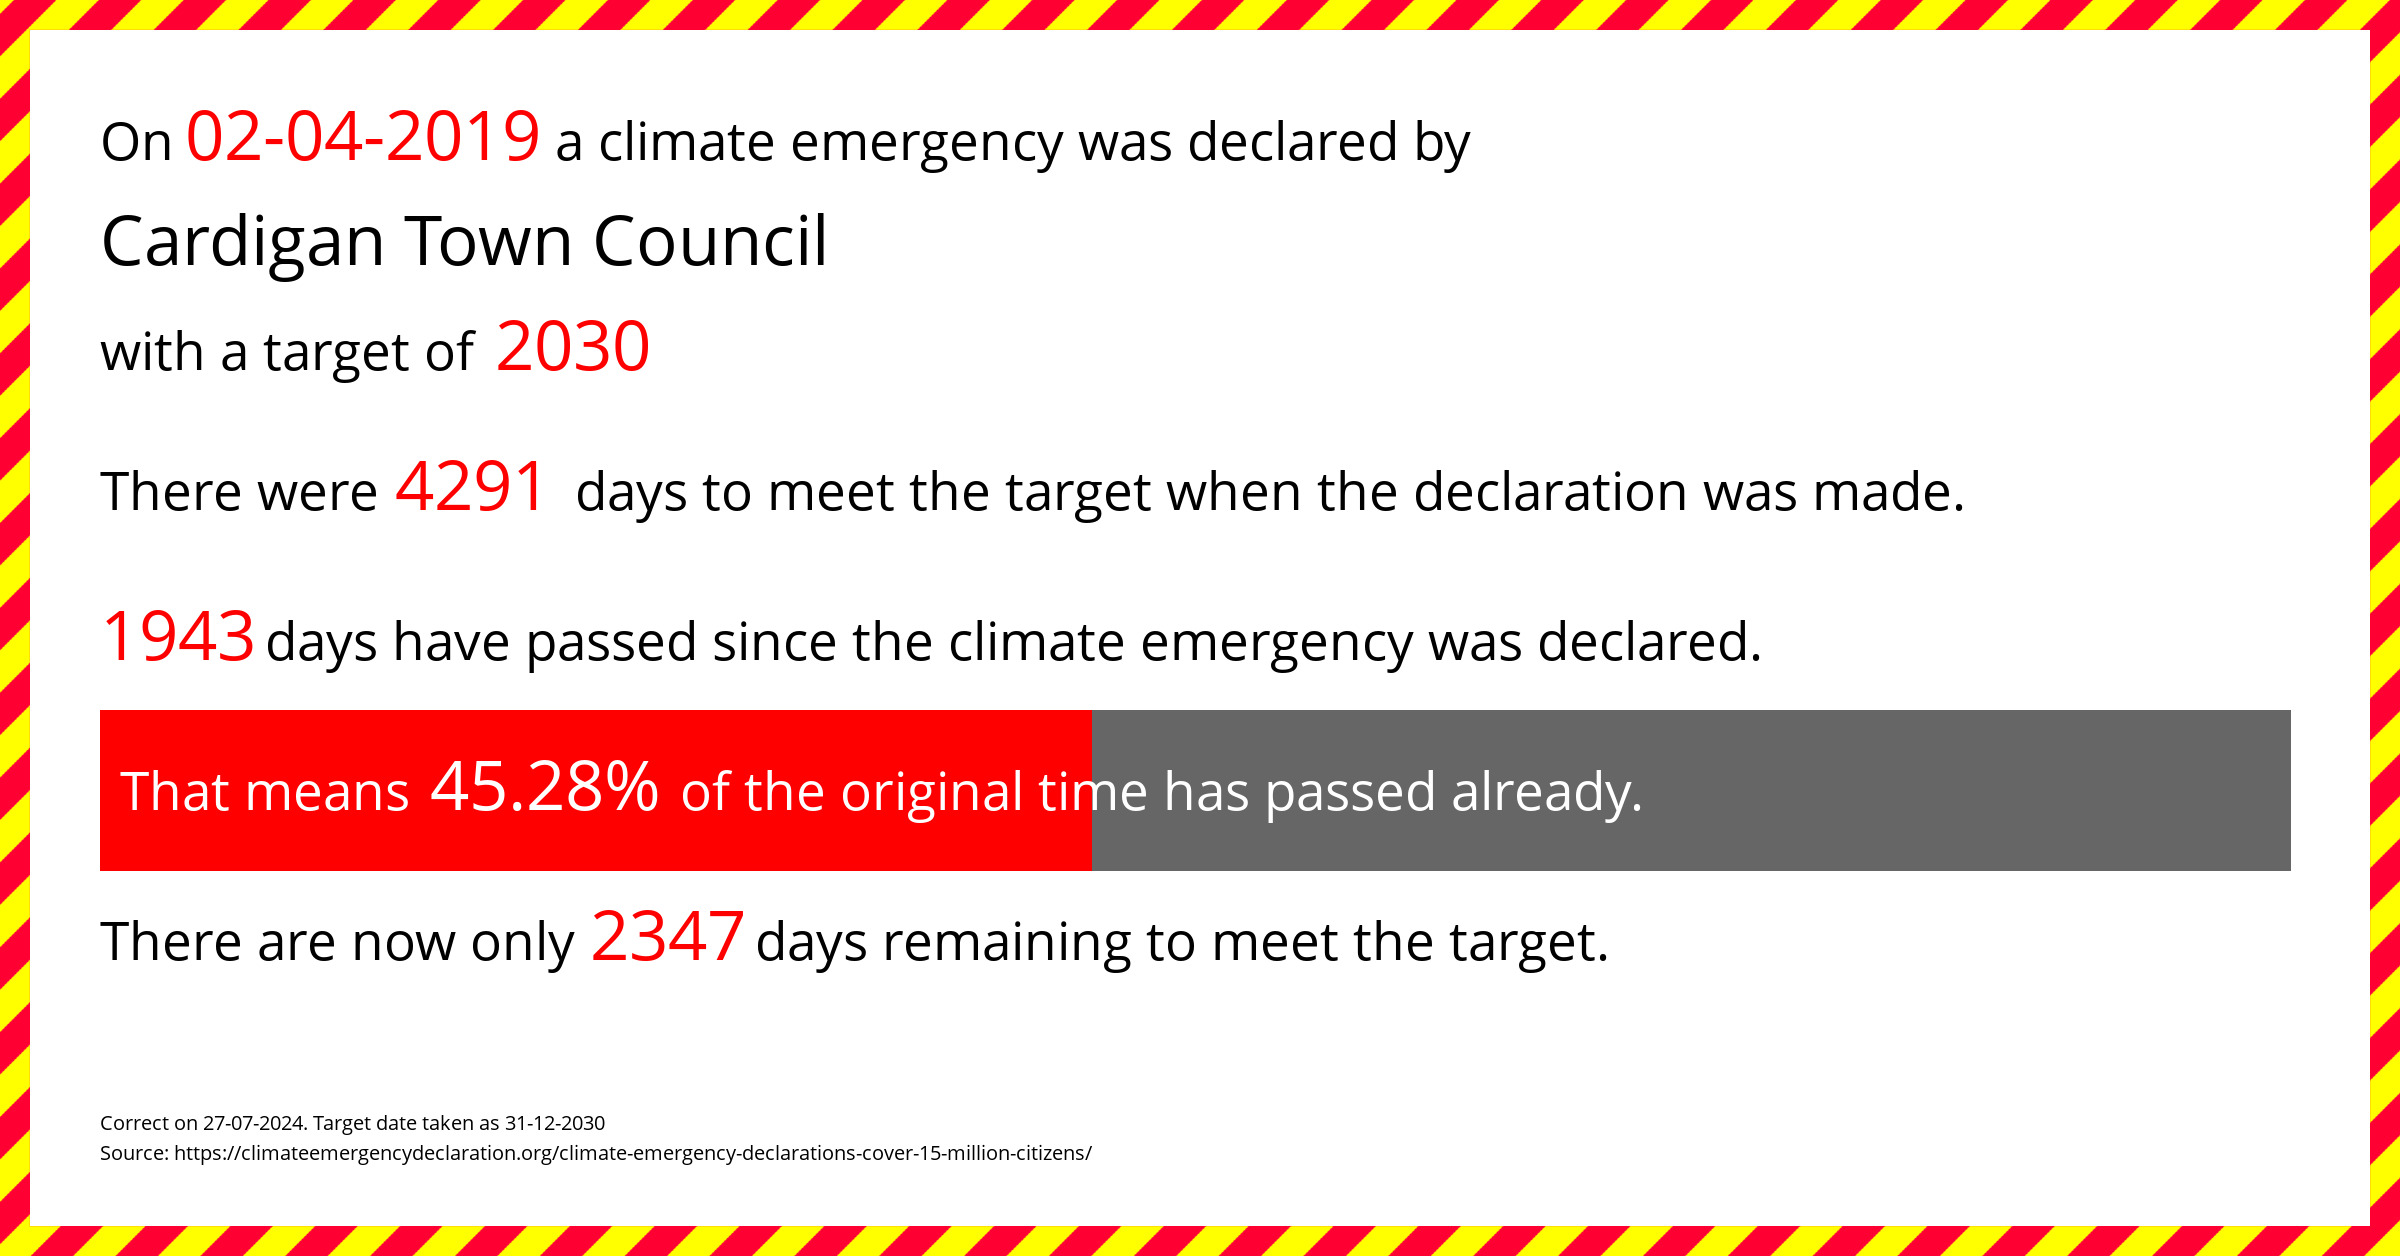 Cardigan Town Council declared a Climate emergency on Tuesday 2nd April 2019, with a target of 2030.